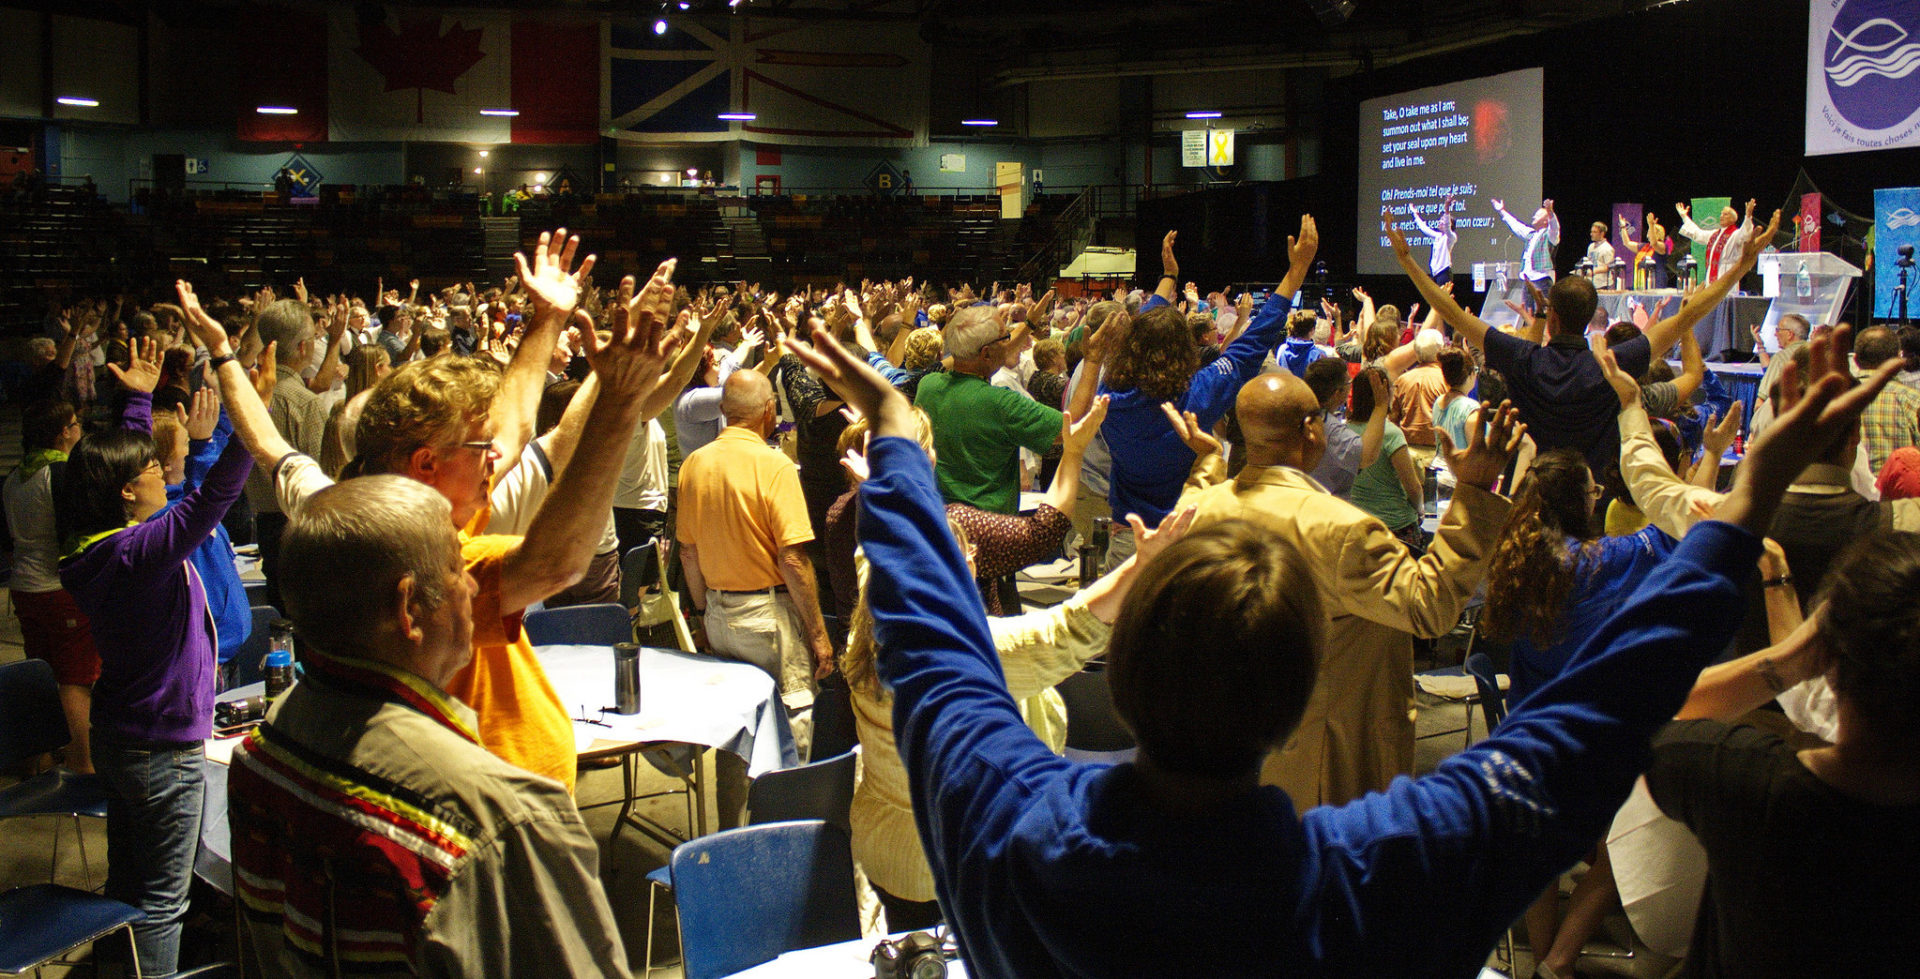 Crowd at General Council in 2015. United Church of Canada/Flickr/Creative Commons